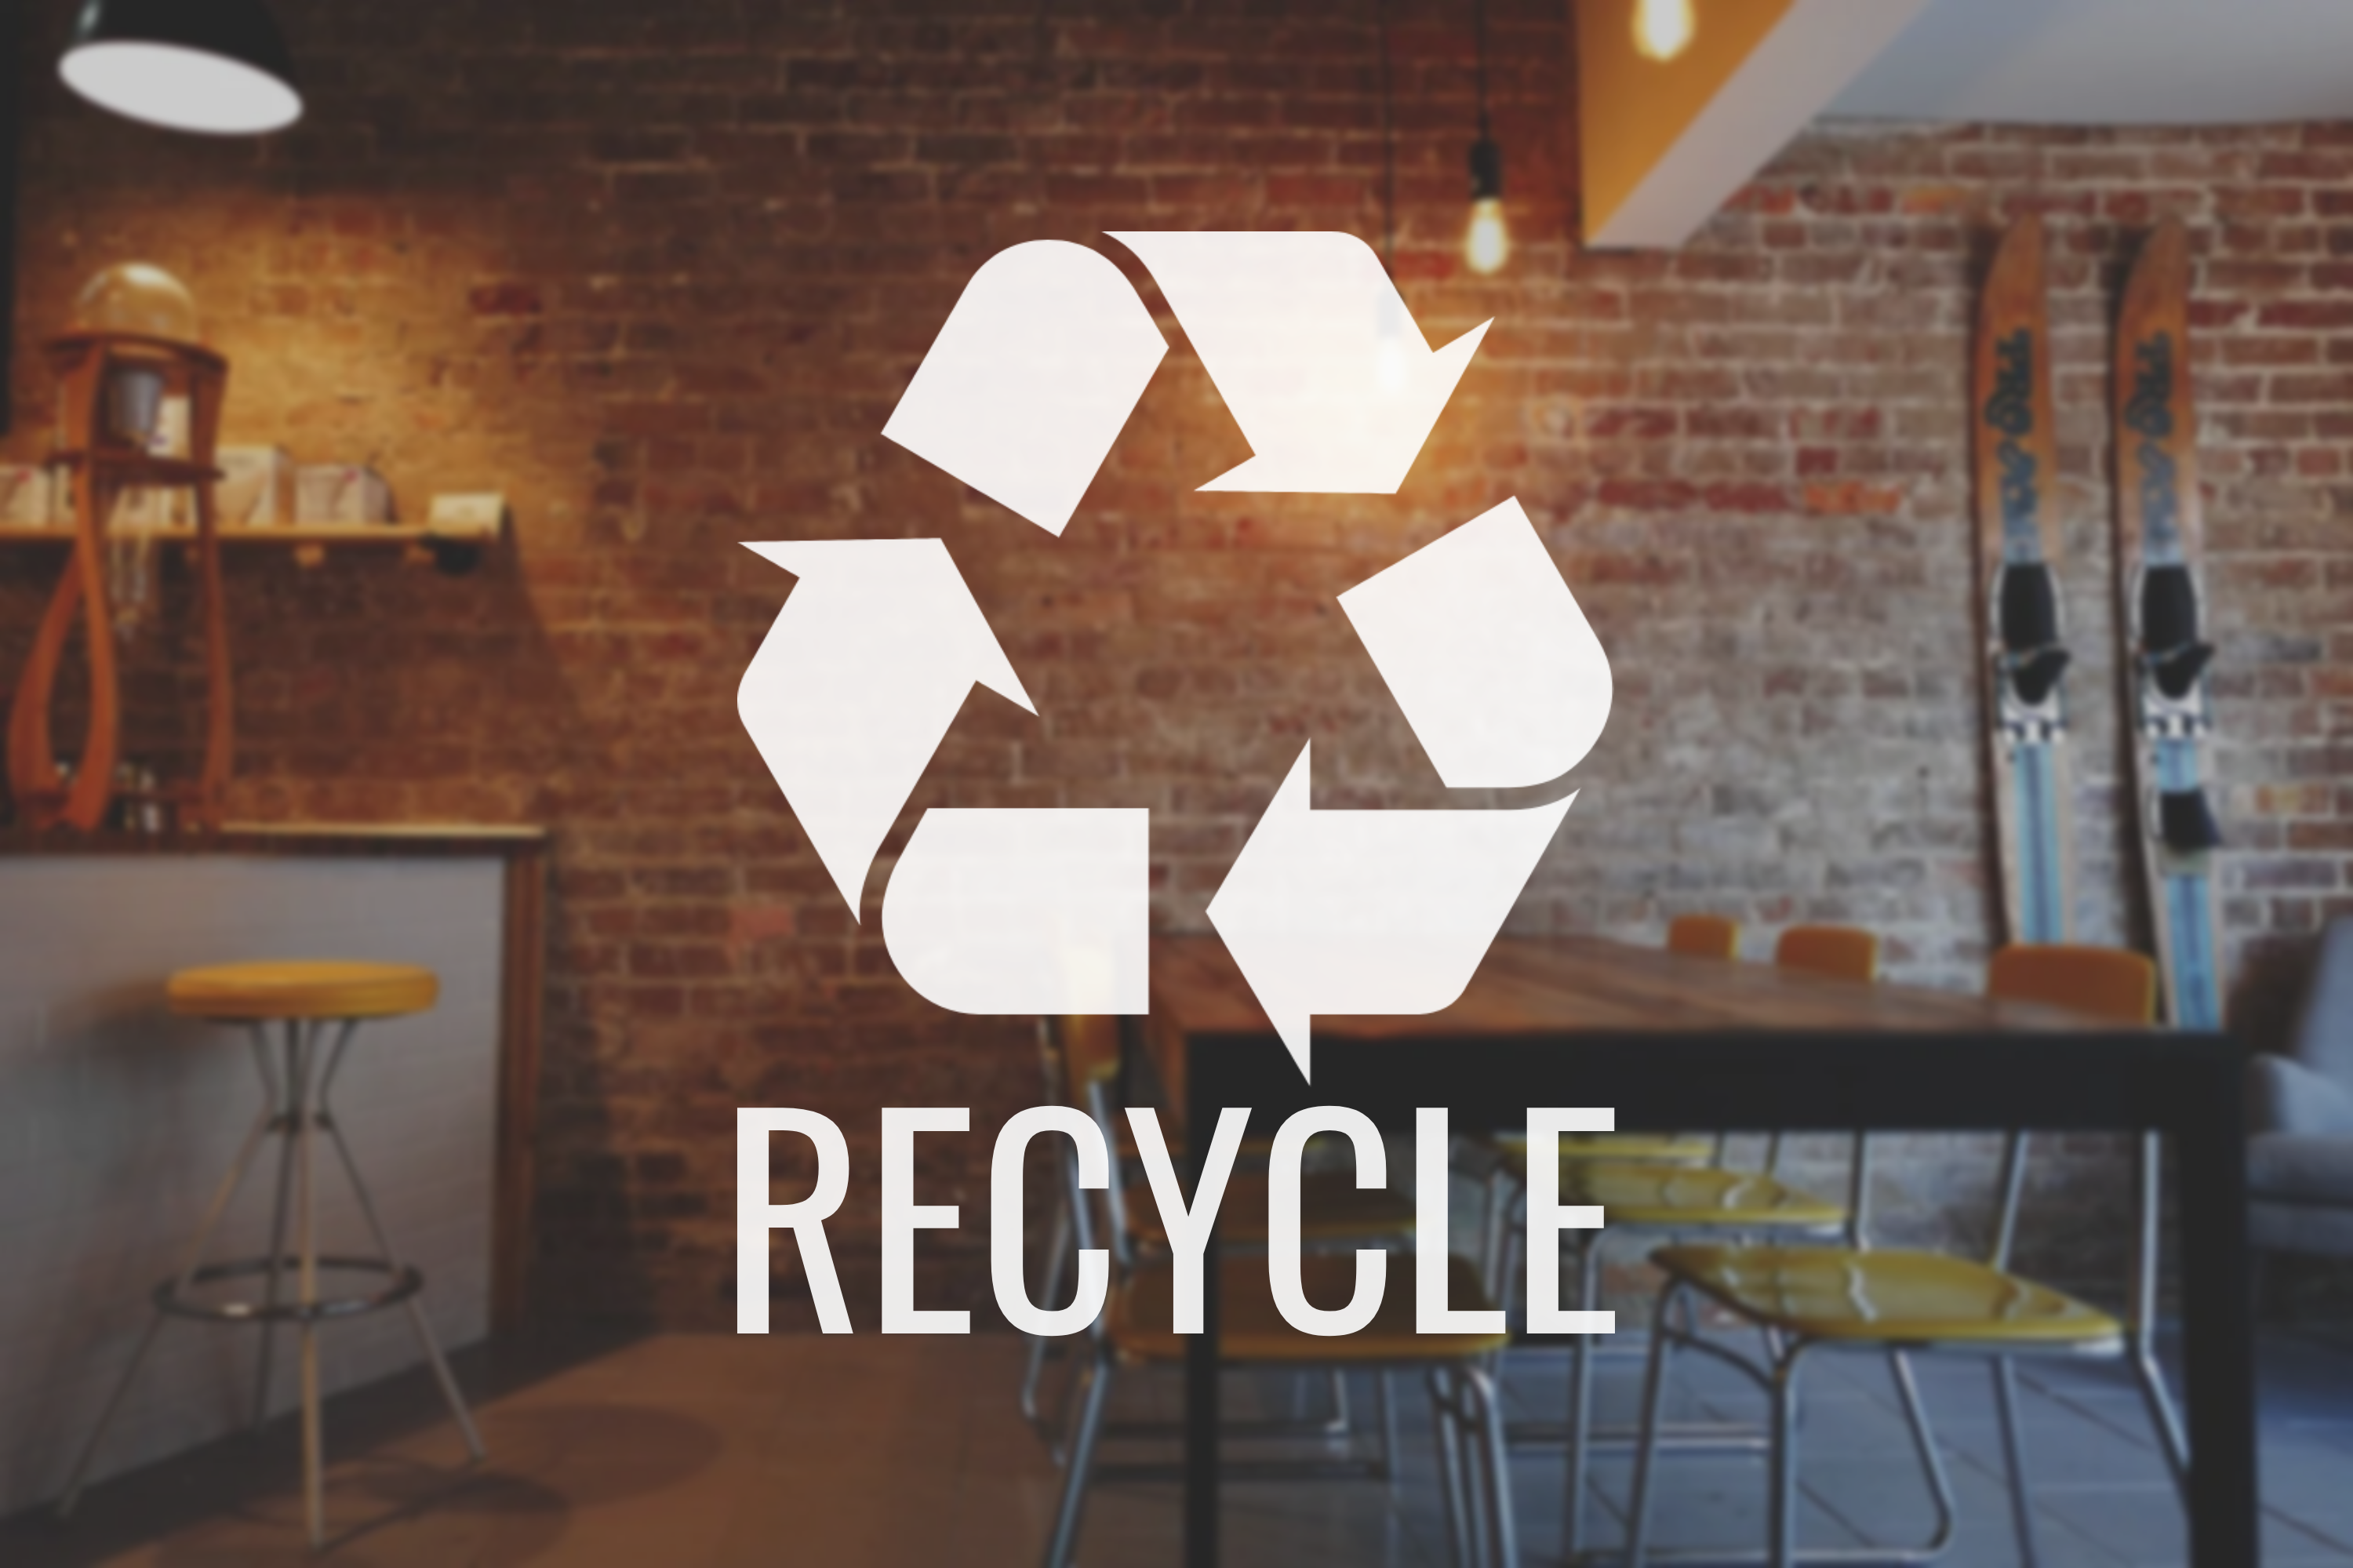 Recycle with Symbol Decal - Vinyl Sticker for Businesses, Stores, Bars, Coffee Shops, Eatery, Cafeteria, Food Truck!